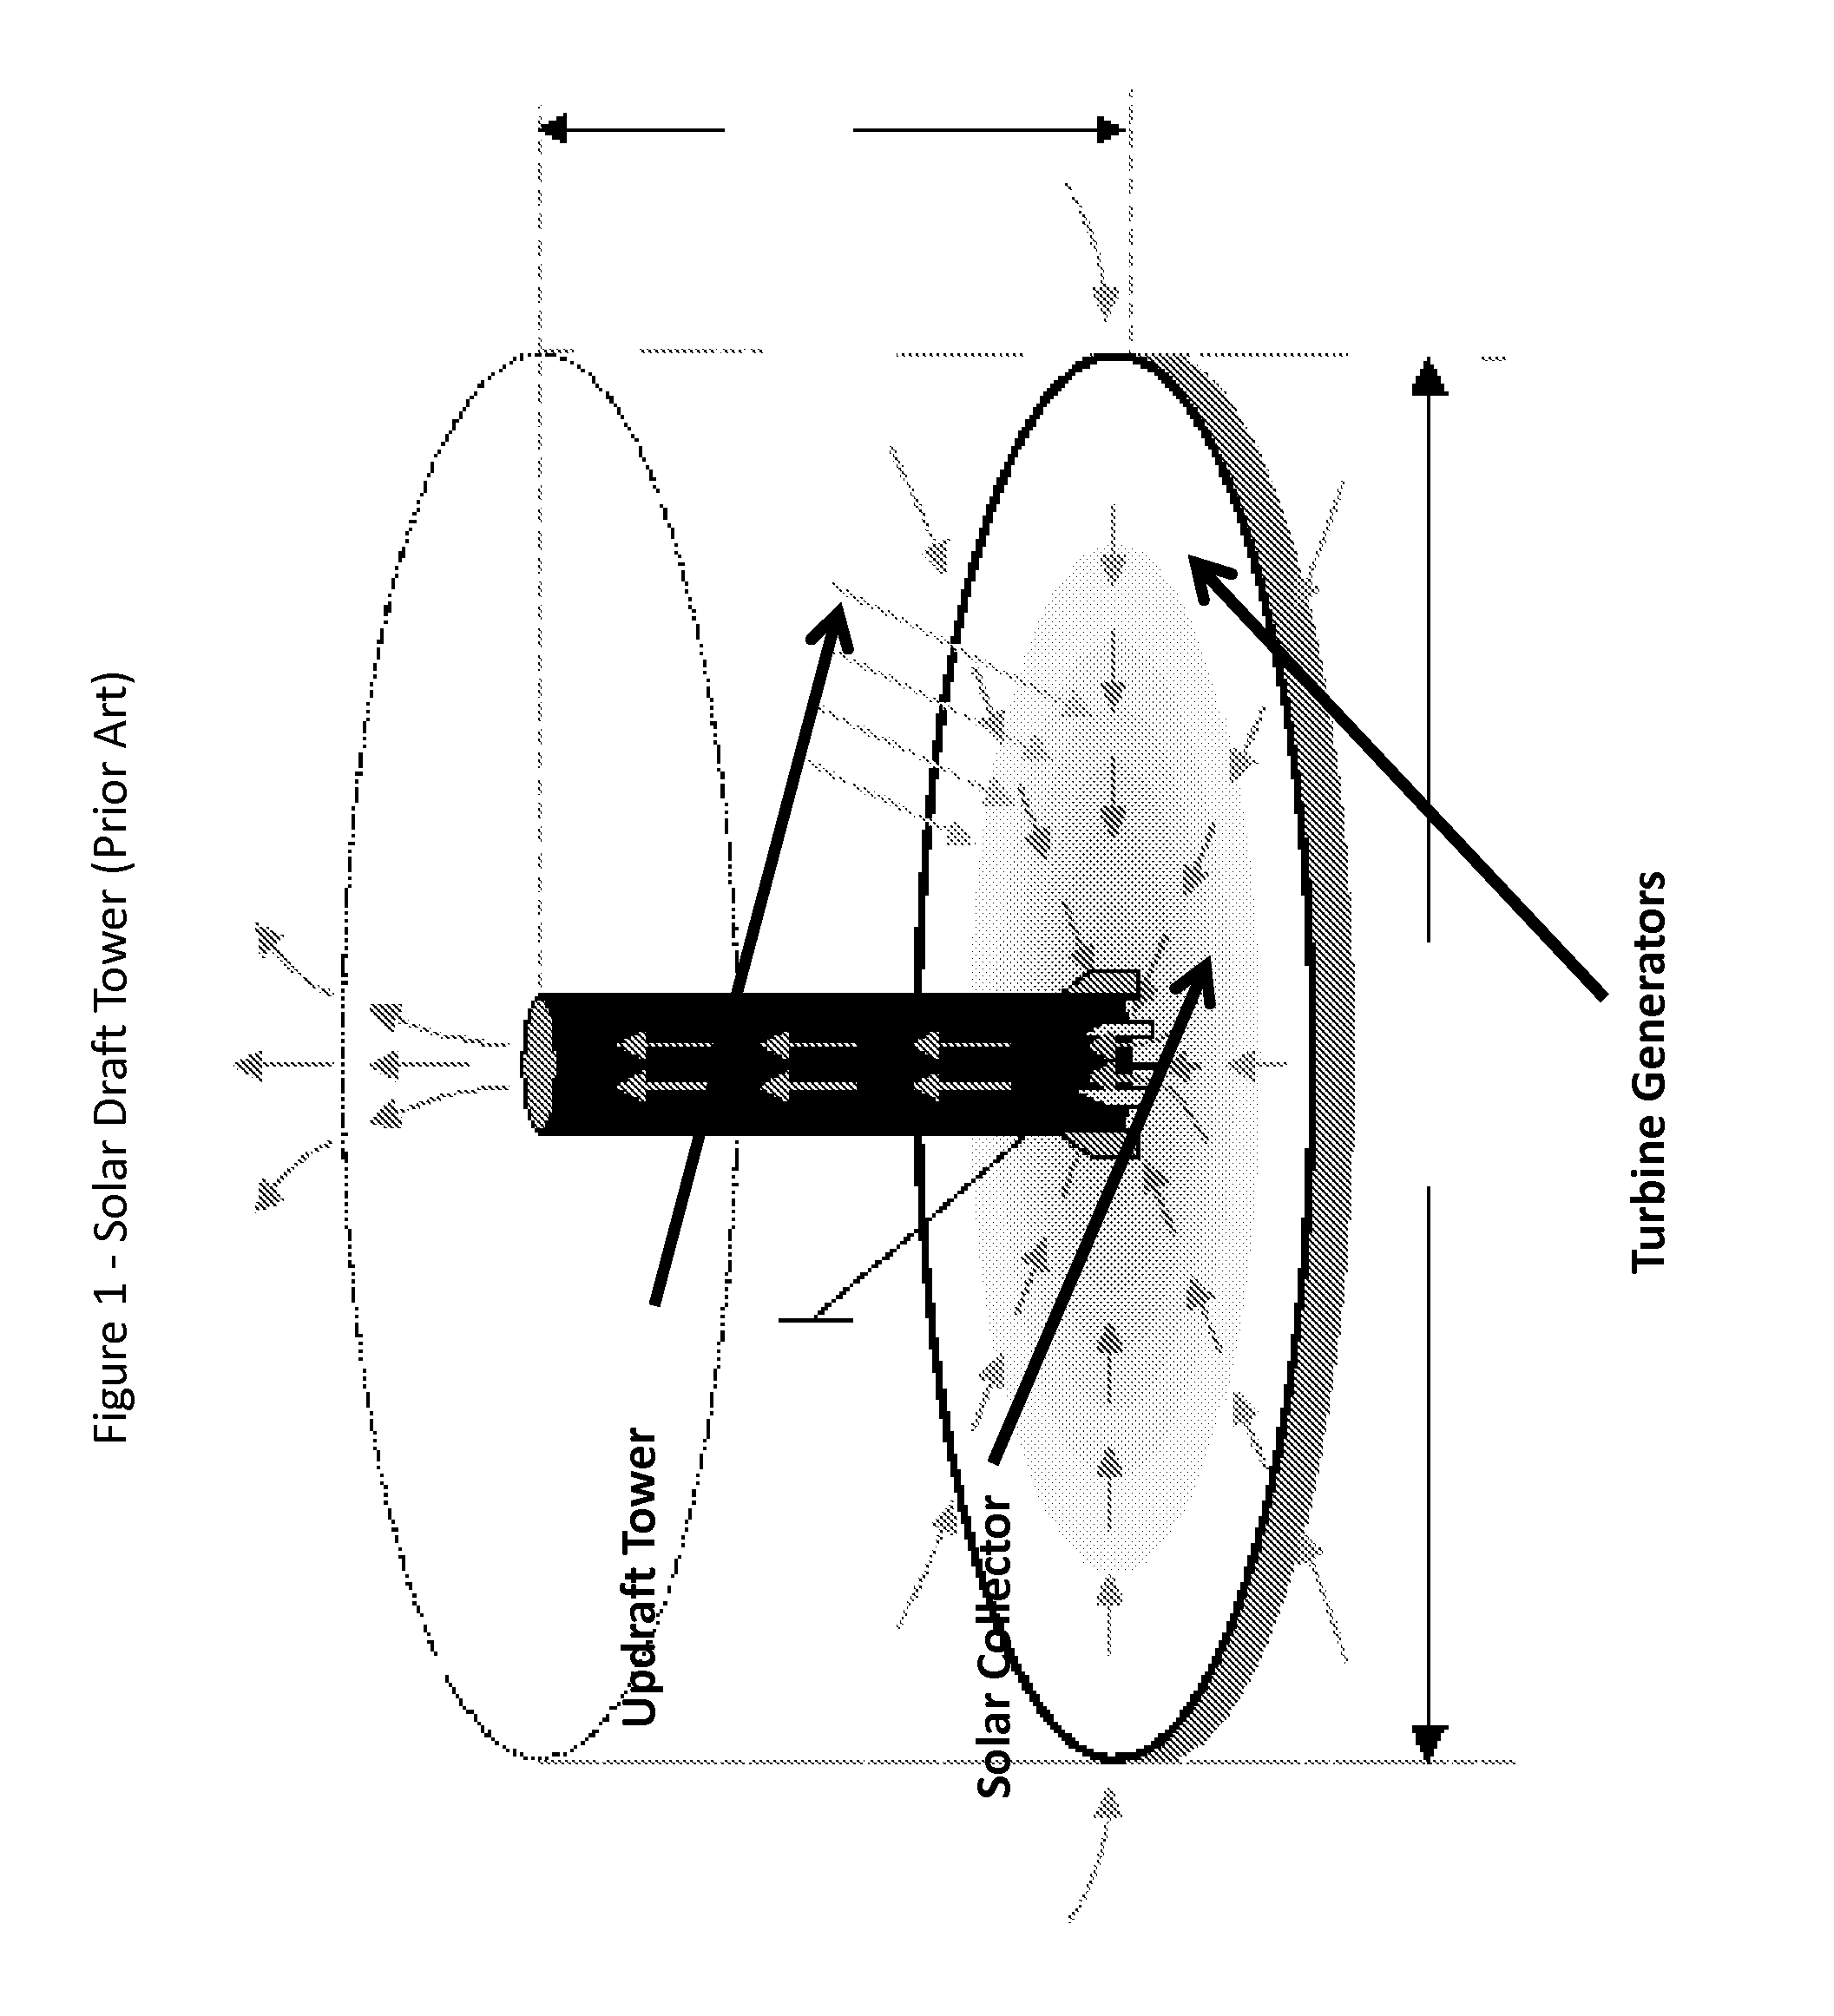 Power Tower - System and Method of Using Air Flow Generated by Geothermal Generated Heat to Drive Turbines Generators for the Generation of Electricity